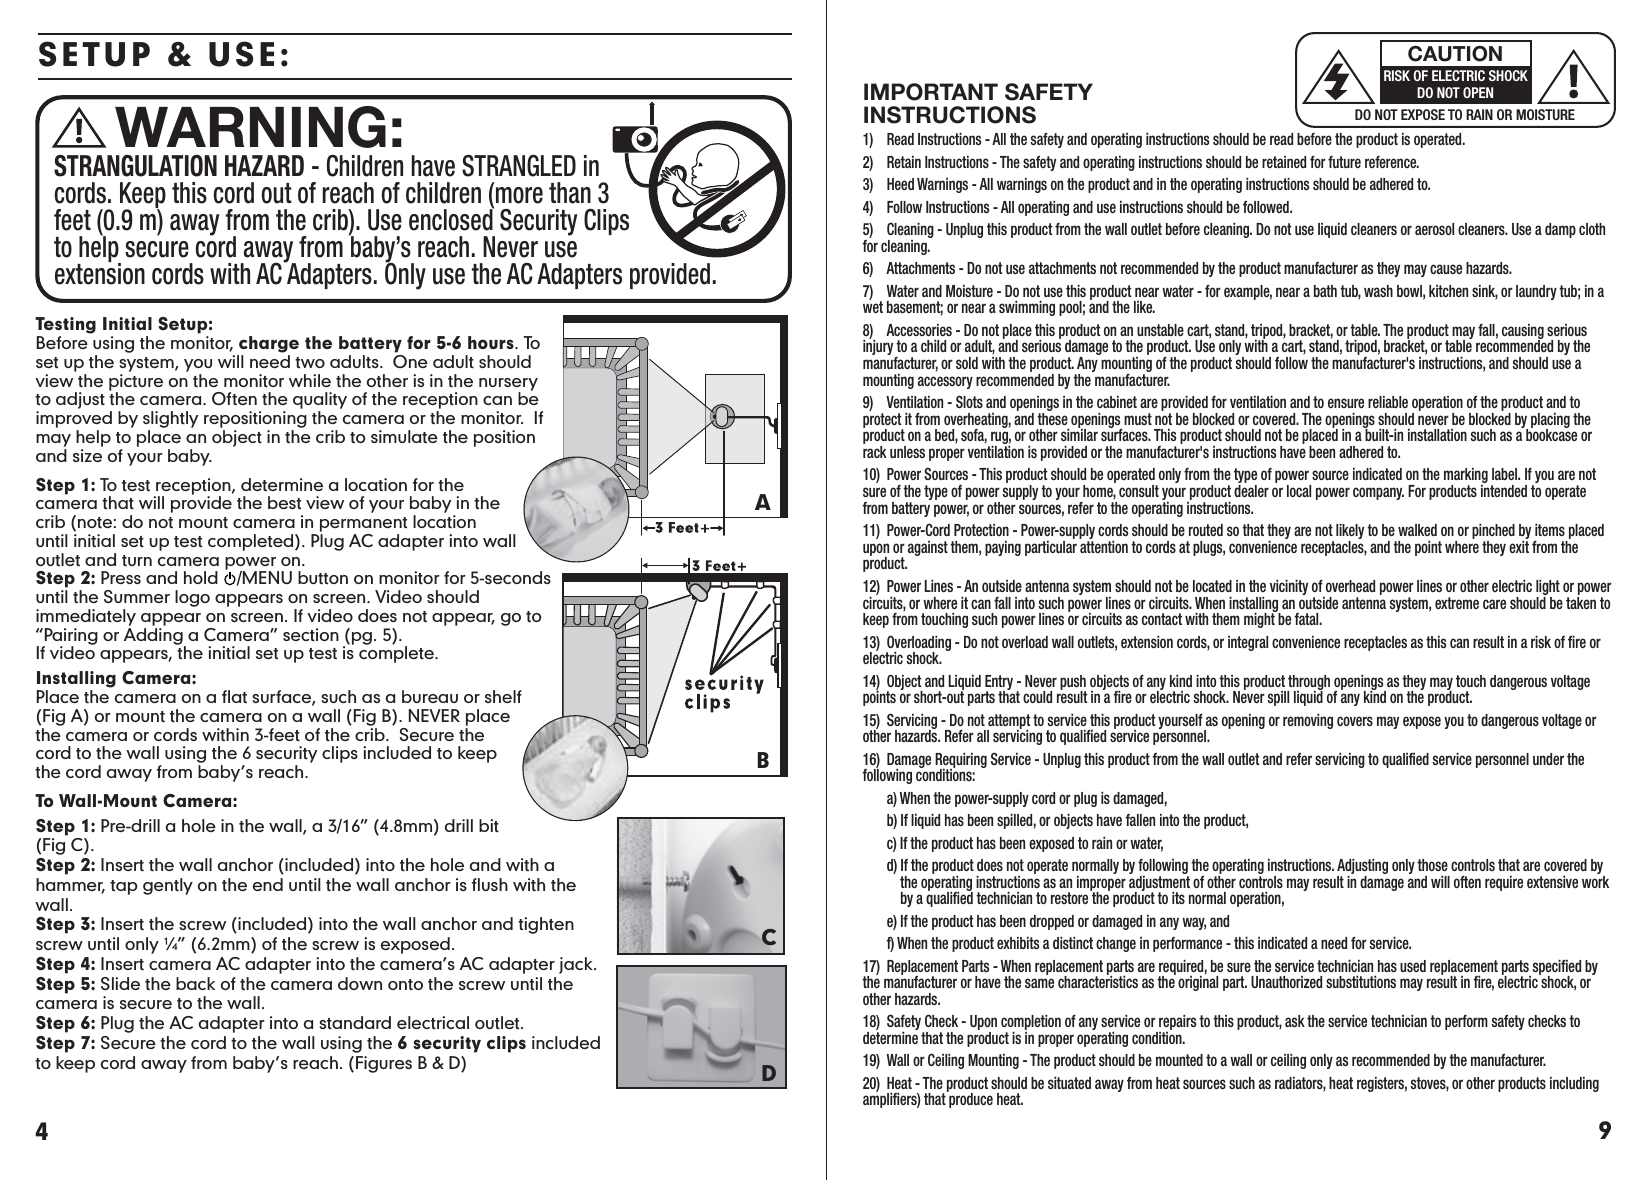 9IMPORTANT SAFETY INSTRUCTIONS1)  Read Instructions - All the safety and operating instructions should be read before the product is operated.2)  Retain Instructions - The safety and operating instructions should be retained for future reference.3)  Heed Warnings - All warnings on the product and in the operating instructions should be adhered to.4)  Follow Instructions - All operating and use instructions should be followed.5)  Cleaning - Unplug this product from the wall outlet before cleaning. Do not use liquid cleaners or aerosol cleaners. Use a damp cloth for cleaning.6)  Attachments - Do not use attachments not recommended by the product manufacturer as they may cause hazards.7)  Water and Moisture - Do not use this product near water - for example, near a bath tub, wash bowl, kitchen sink, or laundry tub; in a wet basement; or near a swimming pool; and the like.8)   Accessories - Do not place this product on an unstable cart, stand, tripod, bracket, or table. The product may fall, causing serious injury to a child or adult, and serious damage to the product. Use only with a cart, stand, tripod, bracket, or table recommended by the manufacturer, or sold with the product. Any mounting of the product should follow the manufacturer&apos;s instructions, and should use a mounting accessory recommended by the manufacturer.9)  Ventilation - Slots and openings in the cabinet are provided for ventilation and to ensure reliable operation of the product and to protect it from overheating, and these openings must not be blocked or covered. The openings should never be blocked by placing the product on a bed, sofa, rug, or other similar surfaces. This product should not be placed in a built-in installation such as a bookcase or rack unless proper ventilation is provided or the manufacturer&apos;s instructions have been adhered to.10)  Power Sources - This product should be operated only from the type of power source indicated on the marking label. If you are not sure of the type of power supply to your home, consult your product dealer or local power company. For products intended to operate from battery power, or other sources, refer to the operating instructions.11)  Power-Cord Protection - Power-supply cords should be routed so that they are not likely to be walked on or pinched by items placed upon or against them, paying particular attention to cords at plugs, convenience receptacles, and the point where they exit from the product.12)  Power Lines - An outside antenna system should not be located in the vicinity of overhead power lines or other electric light or power circuits, or where it can fall into such power lines or circuits. When installing an outside antenna system, extreme care should be taken to keep from touching such power lines or circuits as contact with them might be fatal.13)  Overloading - Do not overload wall outlets, extension cords, or integral convenience receptacles as this can result in a risk of fire or electric shock.14)  Object and Liquid Entry - Never push objects of any kind into this product through openings as they may touch dangerous voltage points or short-out parts that could result in a fire or electric shock. Never spill liquid of any kind on the product.15)  Servicing - Do not attempt to service this product yourself as opening or removing covers may expose you to dangerous voltage or other hazards. Refer all servicing to qualified service personnel.16)  Damage Requiring Service - Unplug this product from the wall outlet and refer servicing to qualified service personnel under the following conditions:  a) When the power-supply cord or plug is damaged,  b) If liquid has been spilled, or objects have fallen into the product,  c) If the product has been exposed to rain or water,  d) If the product does not operate normally by following the operating instructions. Adjusting only those controls that are covered by        the operating instructions as an improper adjustment of other controls may result in damage and will often require extensive work        by a qualified technician to restore the product to its normal operation,  e) If the product has been dropped or damaged in any way, and  f) When the product exhibits a distinct change in performance - this indicated a need for service.17)  Replacement Parts - When replacement parts are required, be sure the service technician has used replacement parts specified by the manufacturer or have the same characteristics as the original part. Unauthorized substitutions may result in fire, electric shock, or other hazards.18)  Safety Check - Upon completion of any service or repairs to this product, ask the service technician to perform safety checks to determine that the product is in proper operating condition.19)  Wall or Ceiling Mounting - The product should be mounted to a wall or ceiling only as recommended by the manufacturer.20)  Heat - The product should be situated away from heat sources such as radiators, heat registers, stoves, or other products including amplifiers) that produce heat.DO NOT EXPOSE TO RAIN OR MOISTURECAUTIONRISK OF ELECTRIC SHOCKDO NOT OPENSTRANGULATION HAZARD - Children have STRANGLED in cords. Keep this cord out of reach of children (more than 3 feet (0.9 m) away from the crib). Use enclosed Security Clips to help secure cord away from baby’s reach. Never use extension cords with AC Adapters. Only use the AC Adapters provided.WARNING:SETUP &amp; USE:Testing Initial Setup:Before using the monitor, charge the battery for 5-6 hours. To set up the system, you will need two adults.  One adult should view the picture on the monitor while the other is in the nursery to adjust the camera. Often the quality of the reception can be improved by slightly repositioning the camera or the monitor.  If may help to place an object in the crib to simulate the position and size of your baby.Step 1: To test reception, determine a location for the camera that will provide the best view of your baby in the crib (note: do not mount camera in permanent location until initial set up test completed). Plug AC adapter into wall outlet and turn camera power on. Step 2: Press and hold    /MENU button on monitor for 5-seconds until the Summer logo appears on screen. Video should immediately appear on screen. If video does not appear, go to “Pairing or Adding a Camera” section (pg. 5). If video appears, the initial set up test is complete.  Installing Camera:   Place the camera on a flat surface, such as a bureau or shelf (Fig A) or mount the camera on a wall (Fig B). NEVER place the camera or cords within 3-feet of the crib.  Secure the cord to the wall using the 6 security clips included to keep the cord away from baby’s reach. To Wall-Mount Camera:Step 1: Pre-drill a hole in the wall, a 3/16” (4.8mm) drill bit (Fig C).Step 2: Insert the wall anchor (included) into the hole and with a hammer, tap gently on the end until the wall anchor is flush with the wall.Step 3: Insert the screw (included) into the wall anchor and tighten screw until only ¼” (6.2mm) of the screw is exposed. Step 4: Insert camera AC adapter into the camera’s AC adapter jack.Step 5: Slide the back of the camera down onto the screw until the camera is secure to the wall. Step 6: Plug the AC adapter into a standard electrical outlet.Step 7: Secure the cord to the wall using the 6 security clips includedto keep cord away from baby’s reach. (Figures B &amp; D) DCBA4